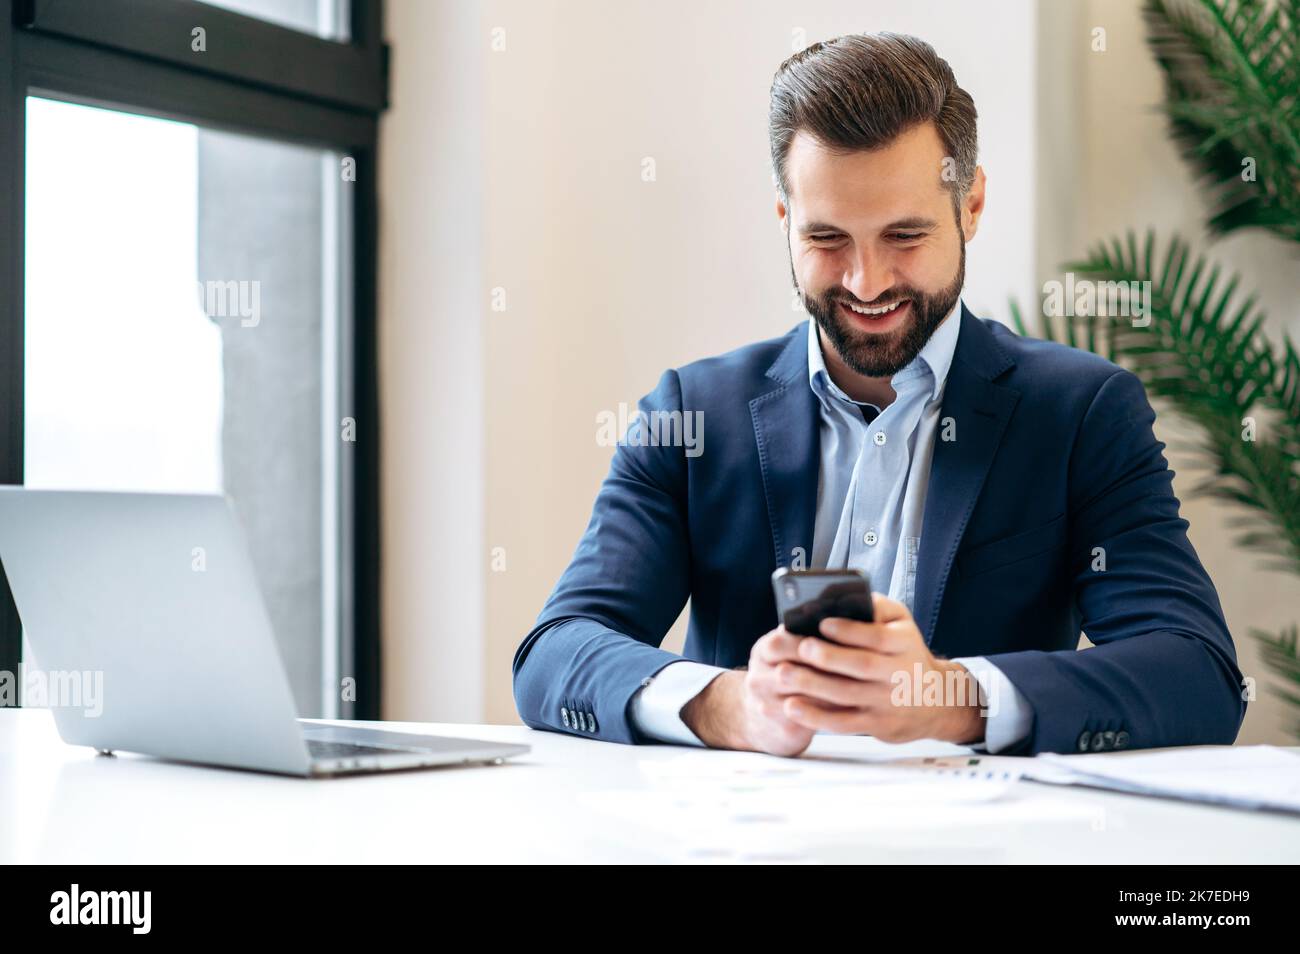 Online messaging. Positive busy caucasian business man in a suit, company employee, top manager, sitting in the office, using his smart phone, texting online with colleague or client, smiling Stock Photo